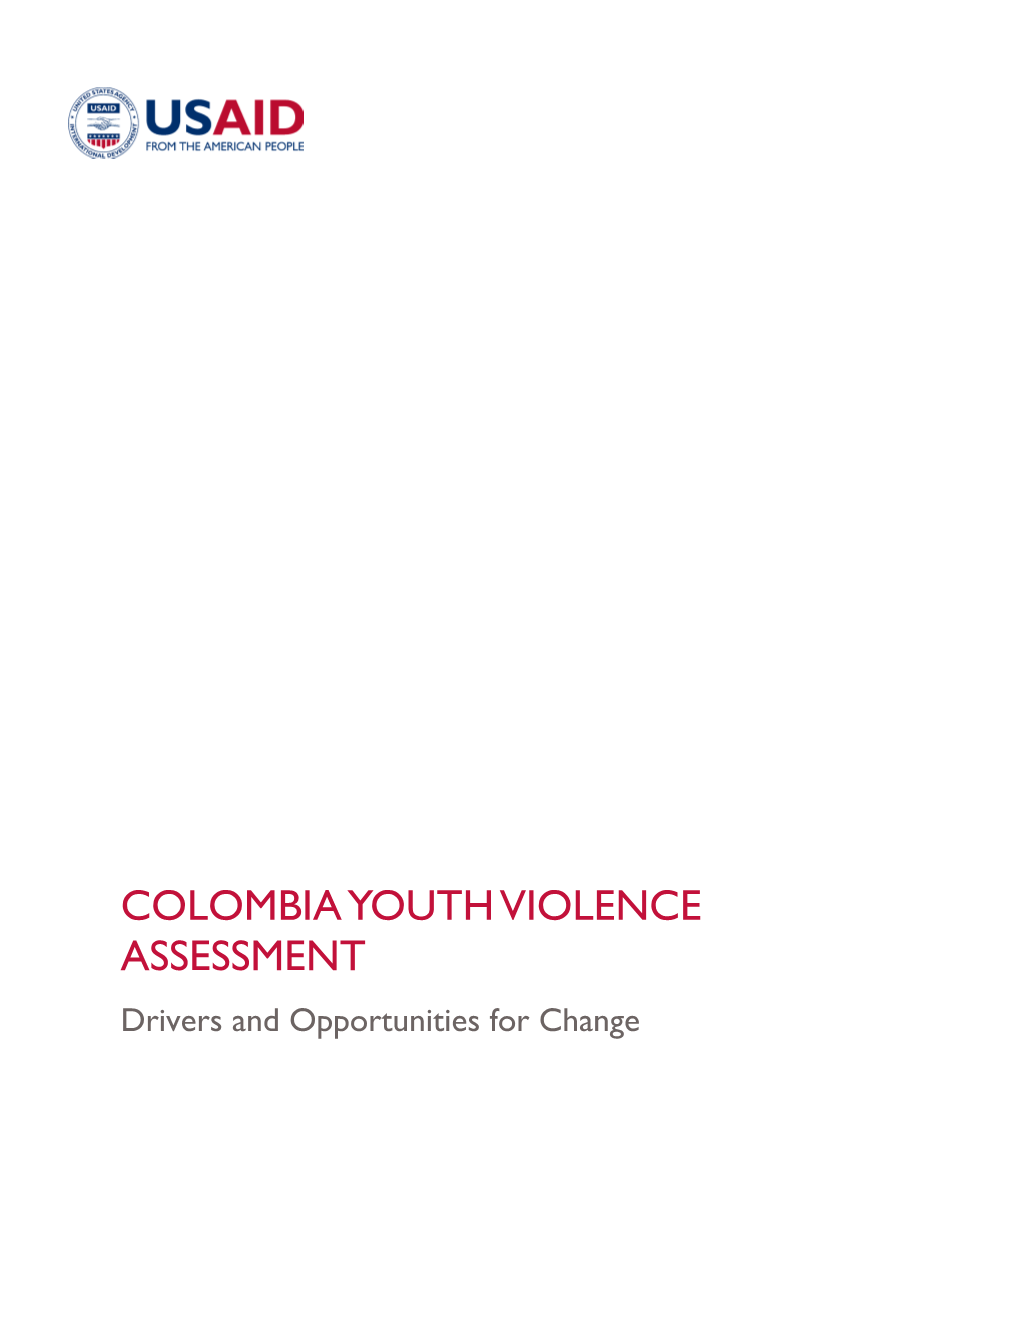 Columbia Youth Violence Assessment Drivers and Opportunities for Change